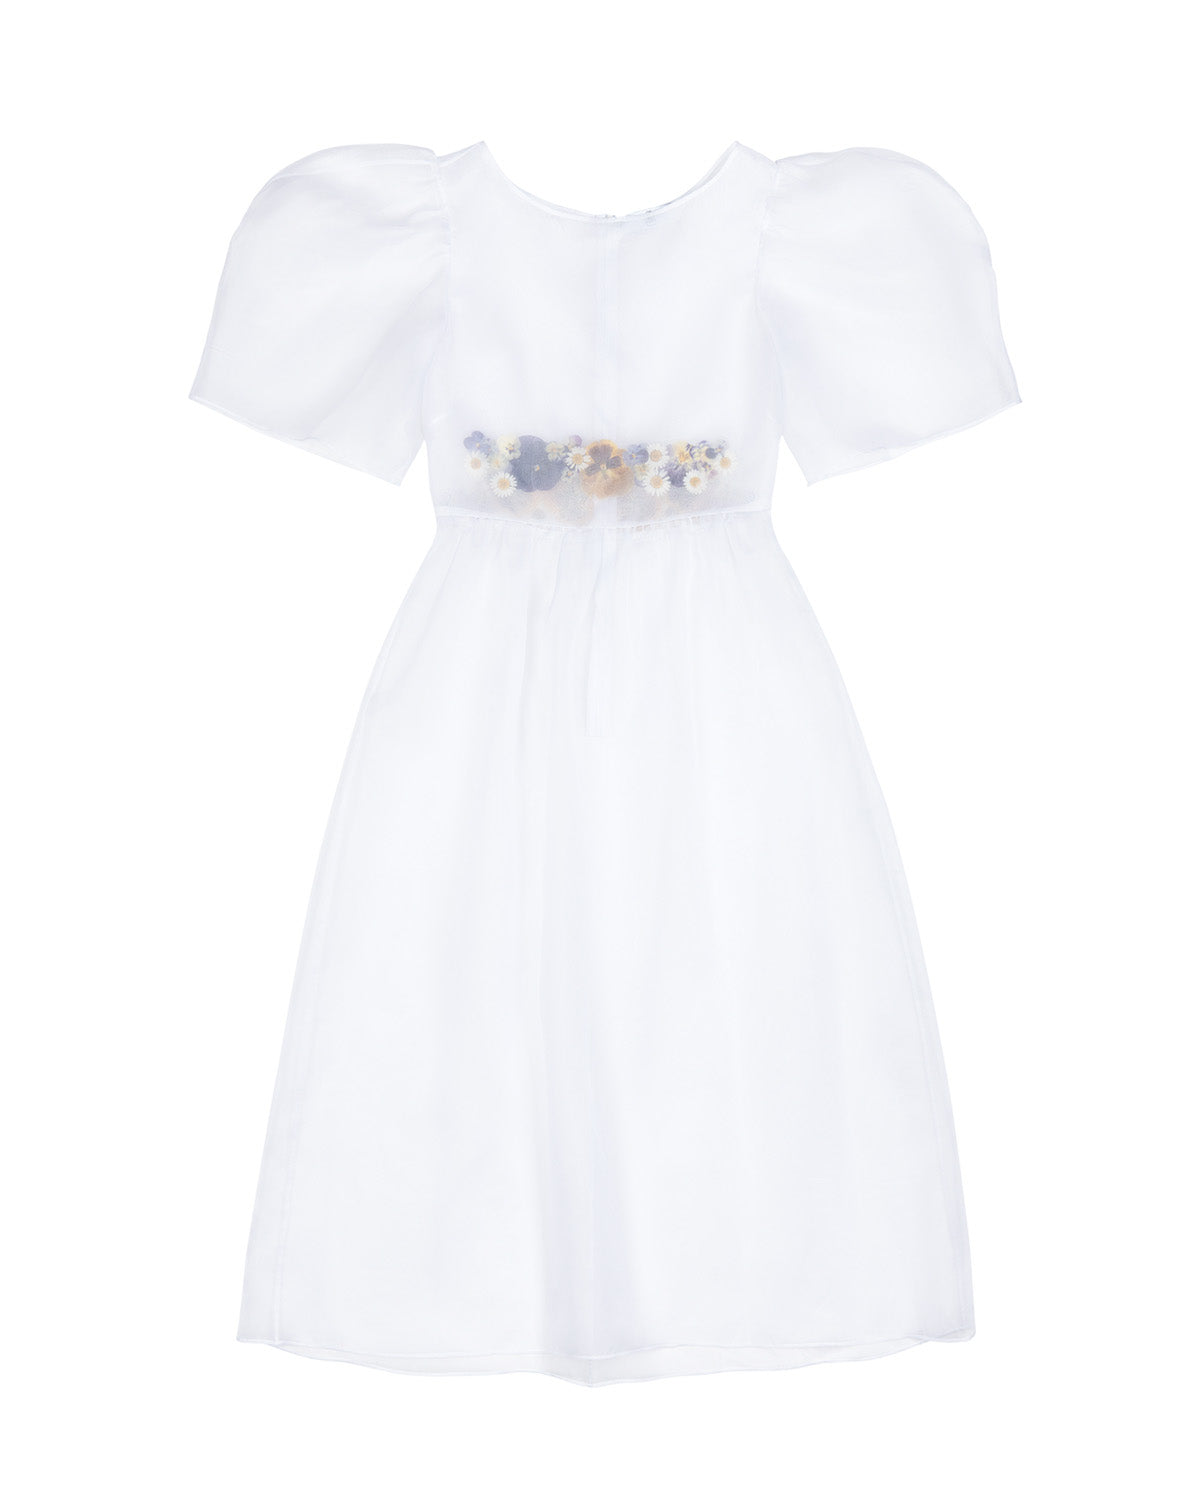 White silk organza dress, inlaid with real pressed pansy and daisy paillettes to front and back waist